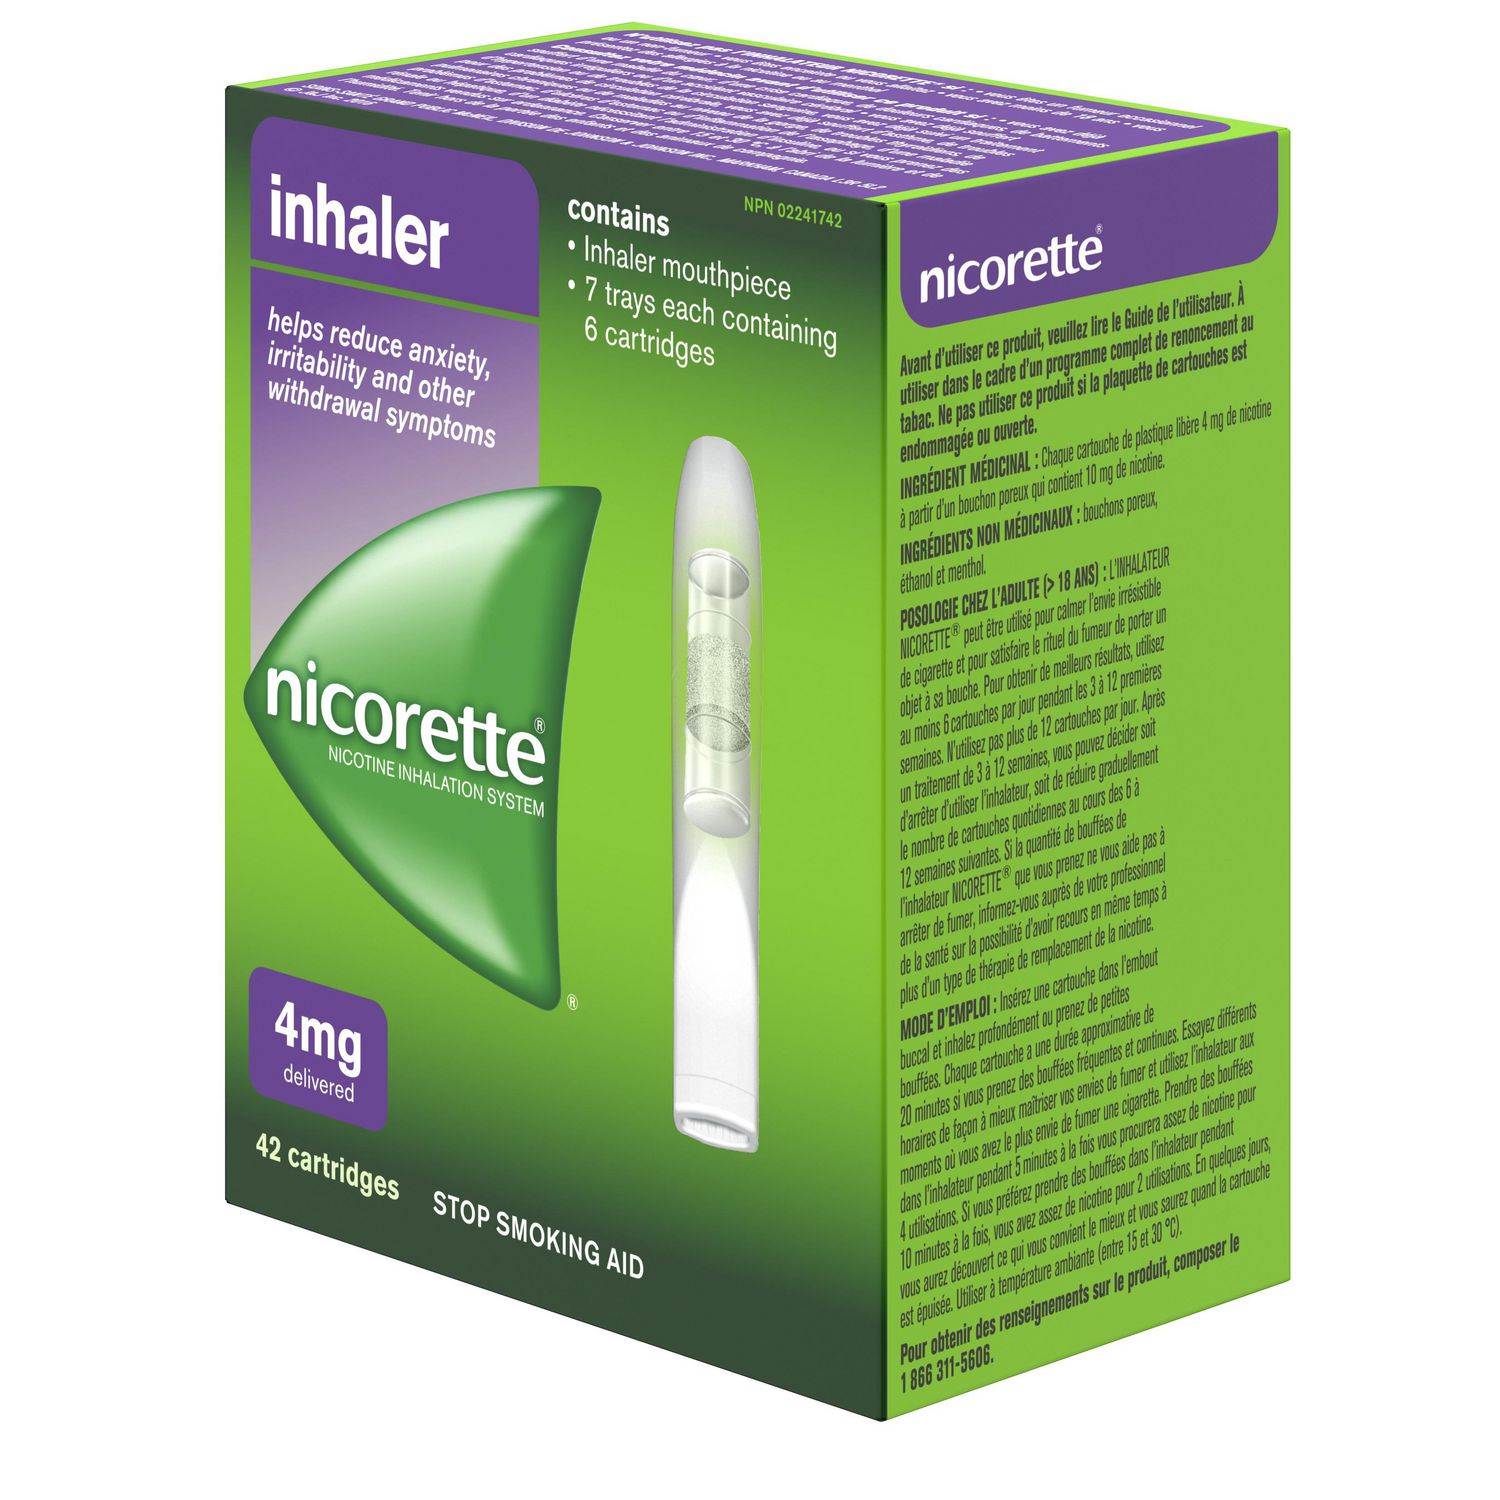 NICORETTE Inhaler - How To Video (ENG) - YouTube